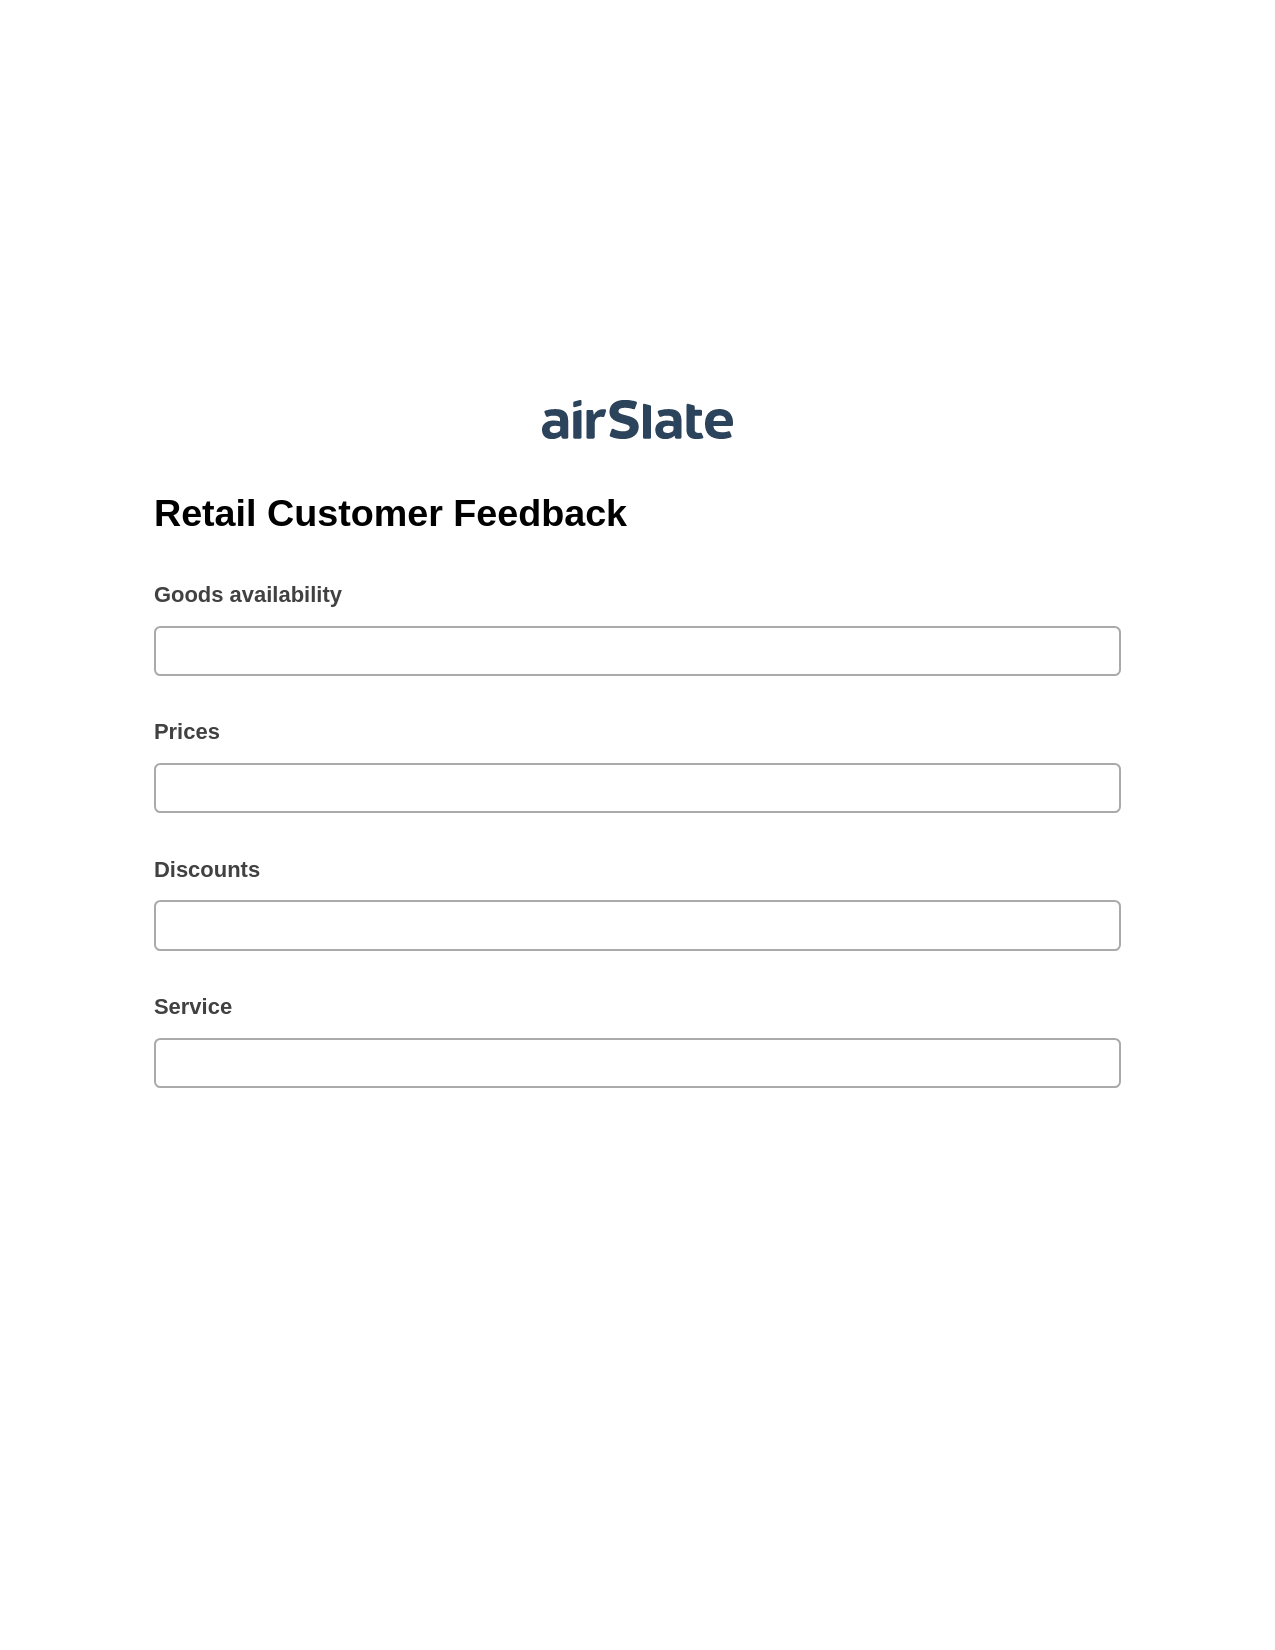 Retail Customer Feedback Pre-fill from CSV File Bot, Create QuickBooks invoice Bot, Export to NetSuite Record Bot